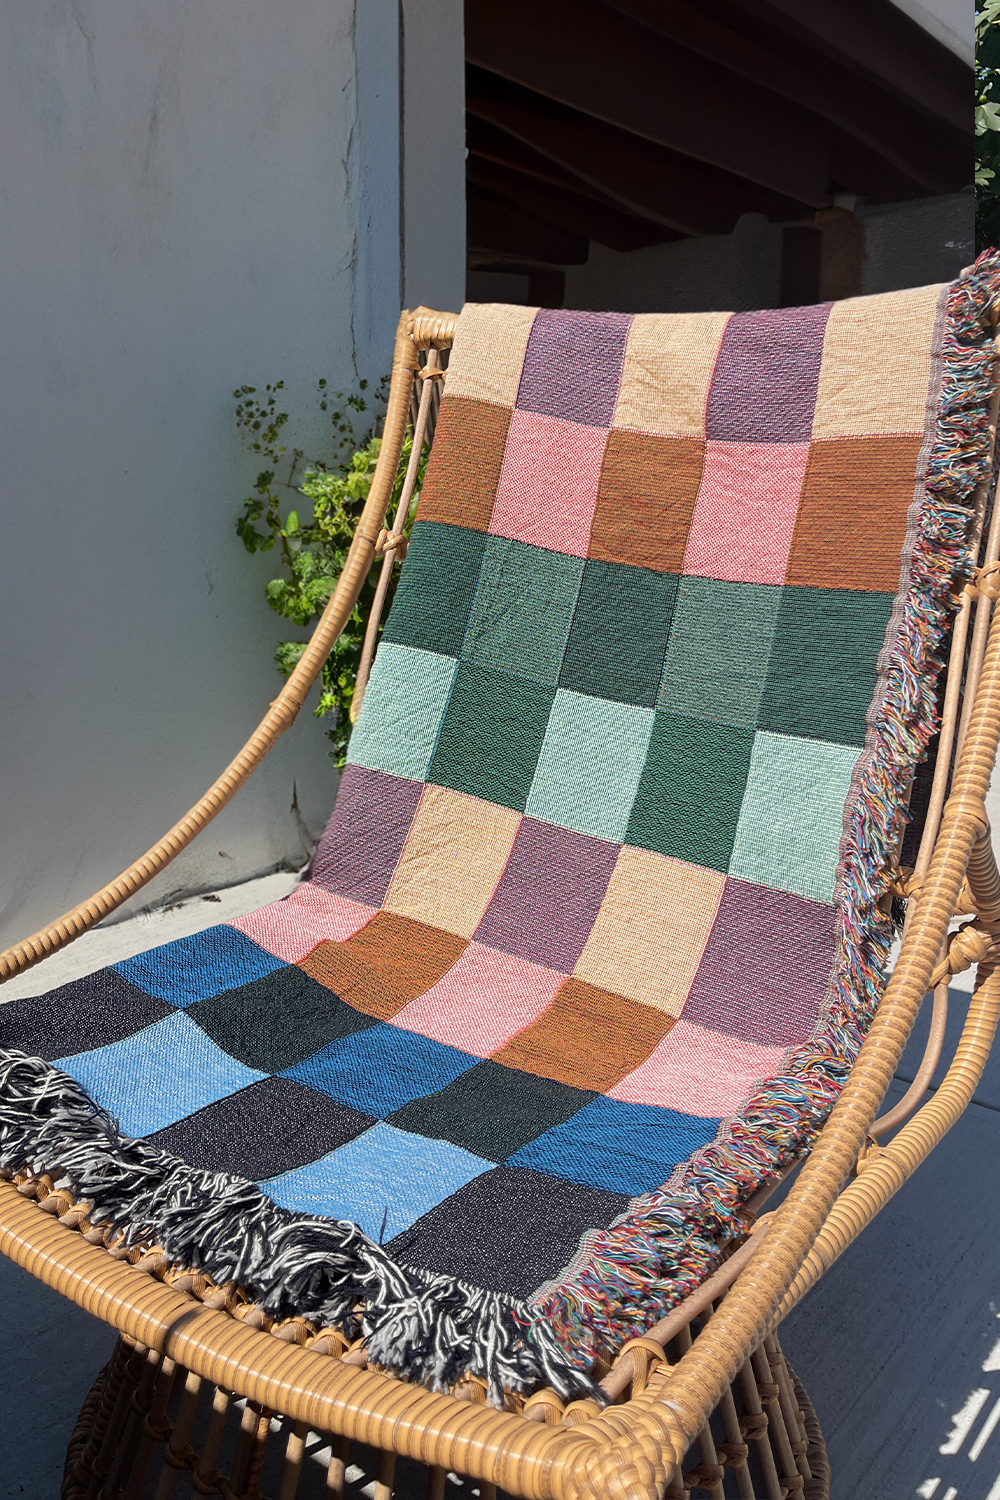 Vibrant Gingham Cotton Woven Throw Blanket with a colorful checker pattern.